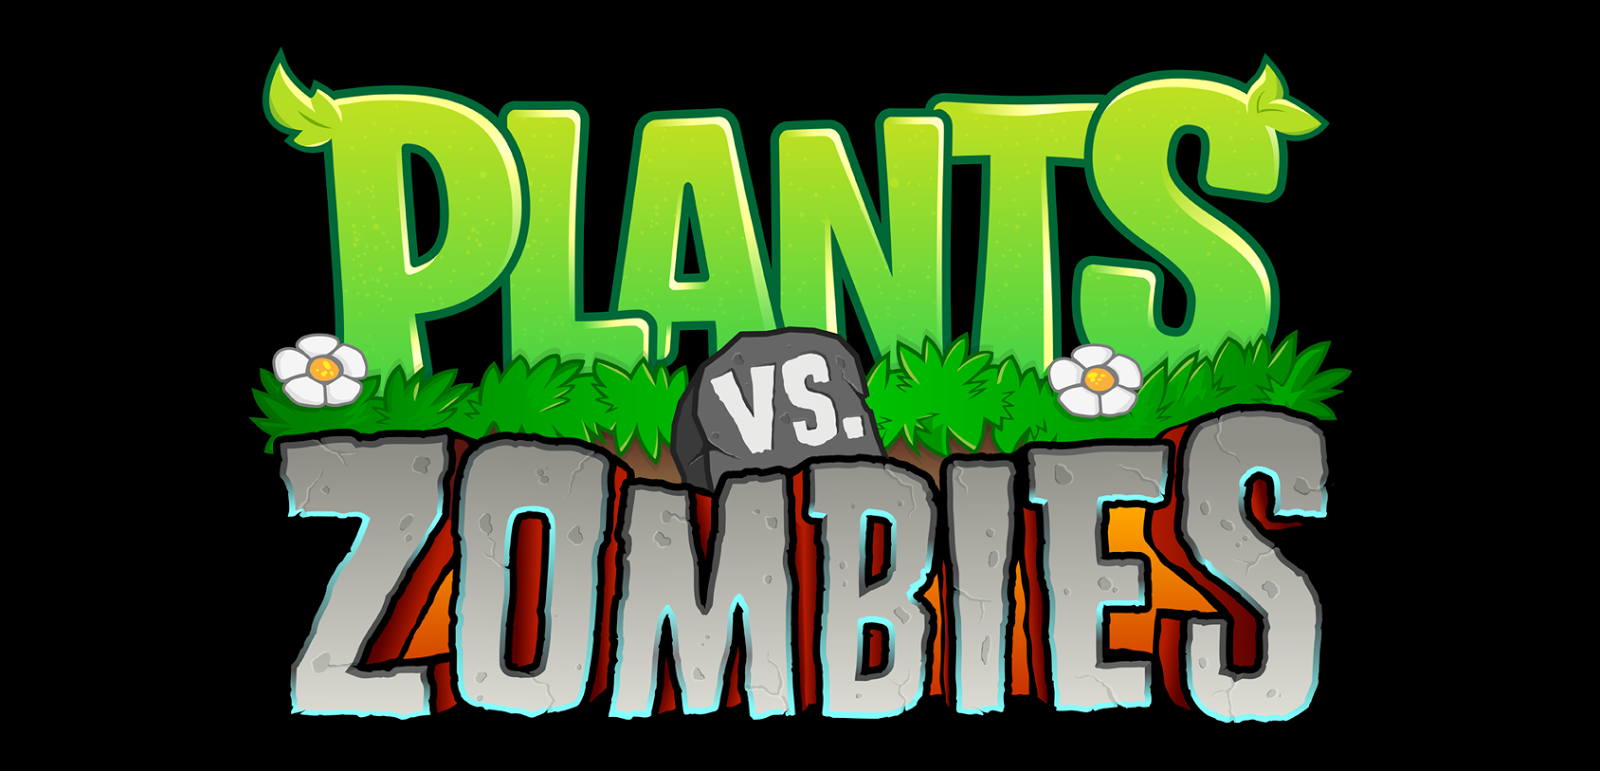 Full Free H Game Download Plants Vs Zombies For Android